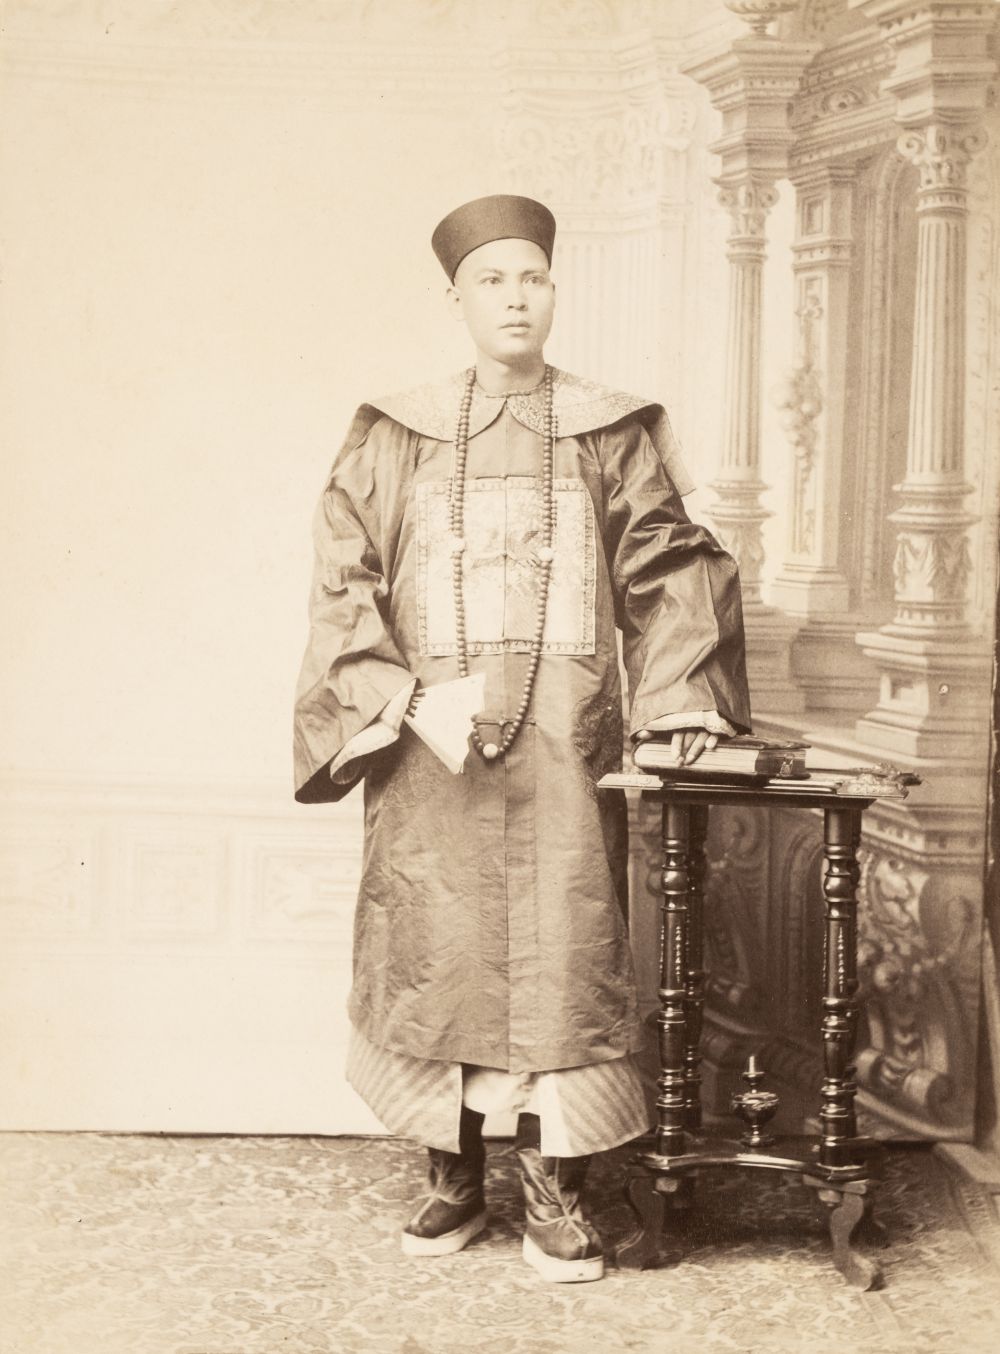 * China. Portrait of a Chinese Mandarin, possibly taken in Europe on an official visit, c. 1880